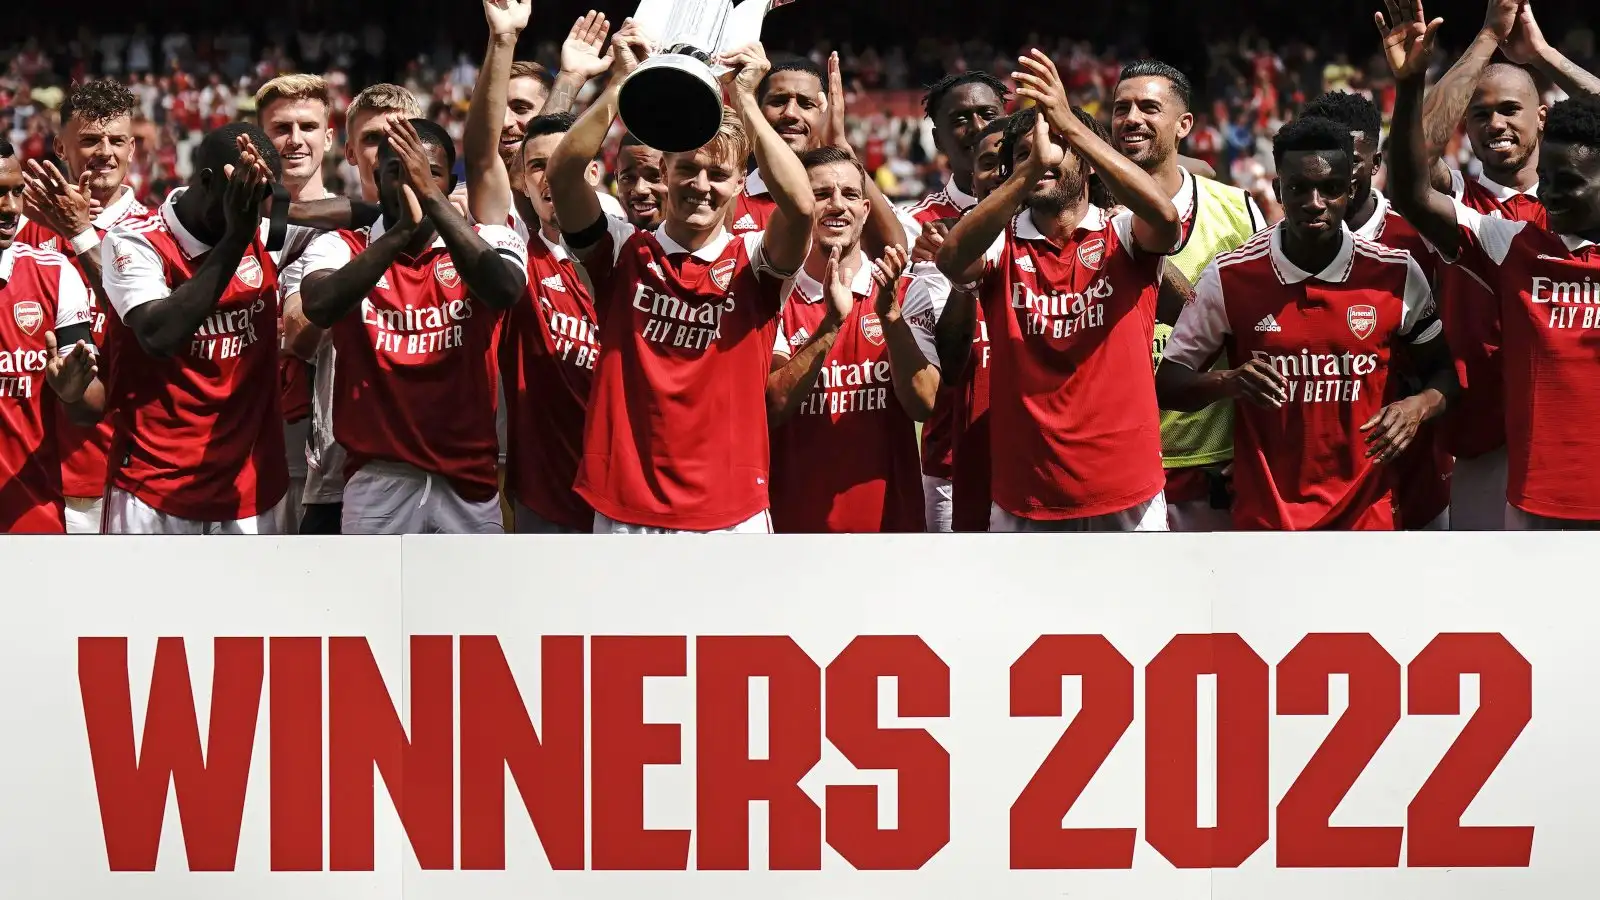 Arsenal win the Emirates Cup